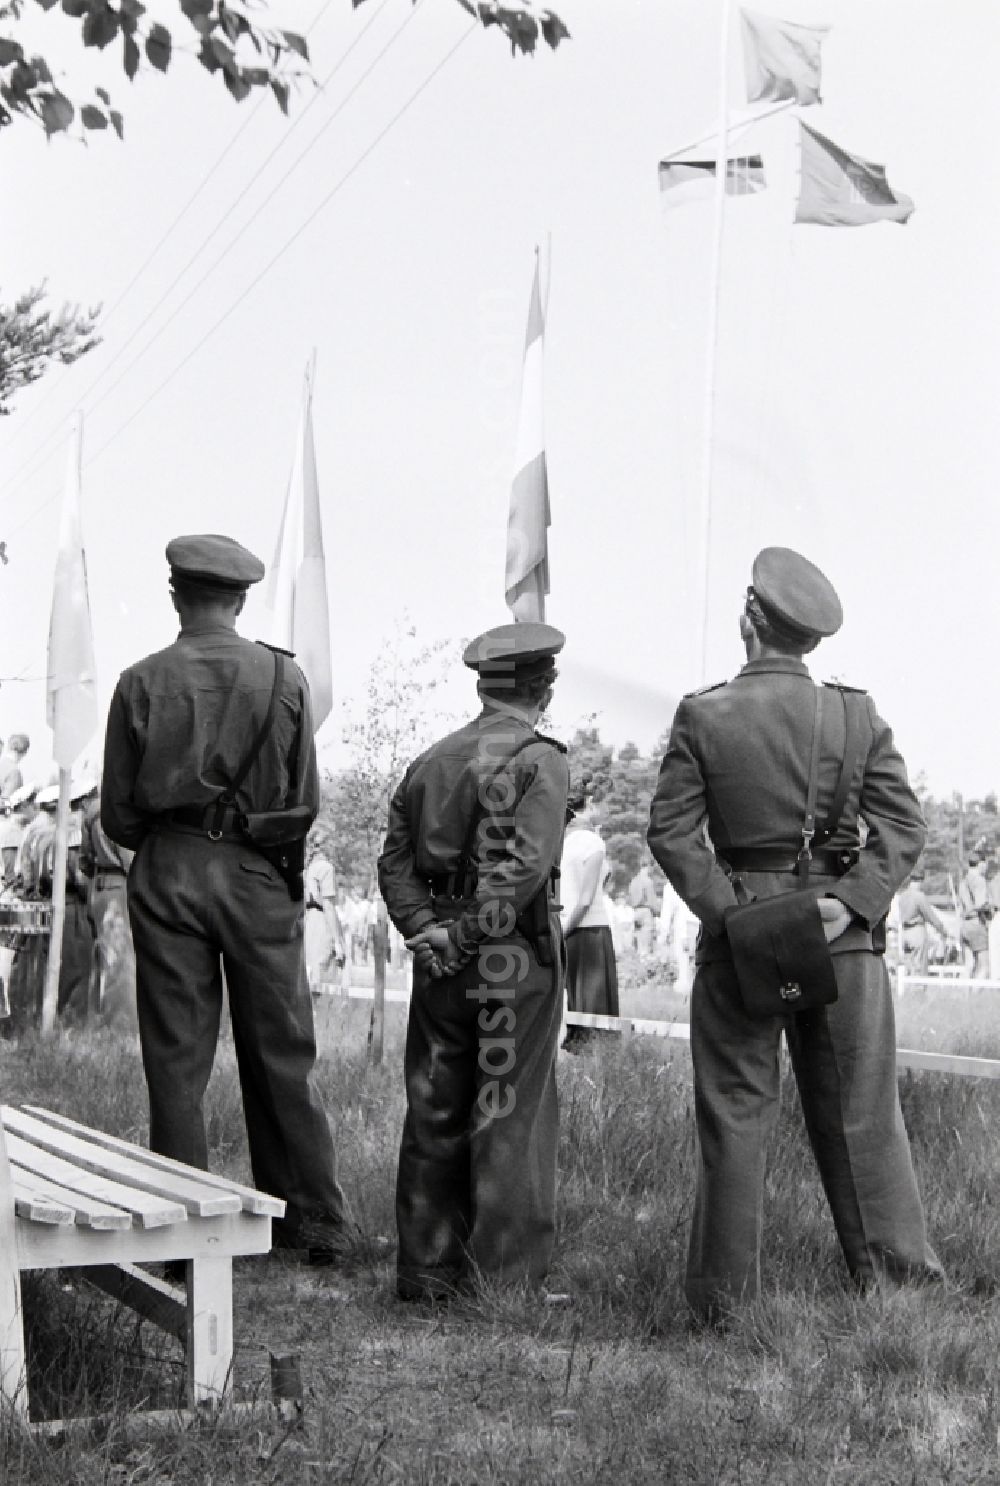 GDR photo archive: Prerow - Summer camp operation with pupils and teenagers in the summer camp Kim Ir Sen of the pioneer organization Ernst Thaelmann in Prerow in the state Mecklenburg-Western Pomerania on the territory of the former GDR, German Democratic Republic. With homemade phantasy uniforms and pre-military drill and ante-exercises, the communist tradition was commemorated in the Spanish Civil War